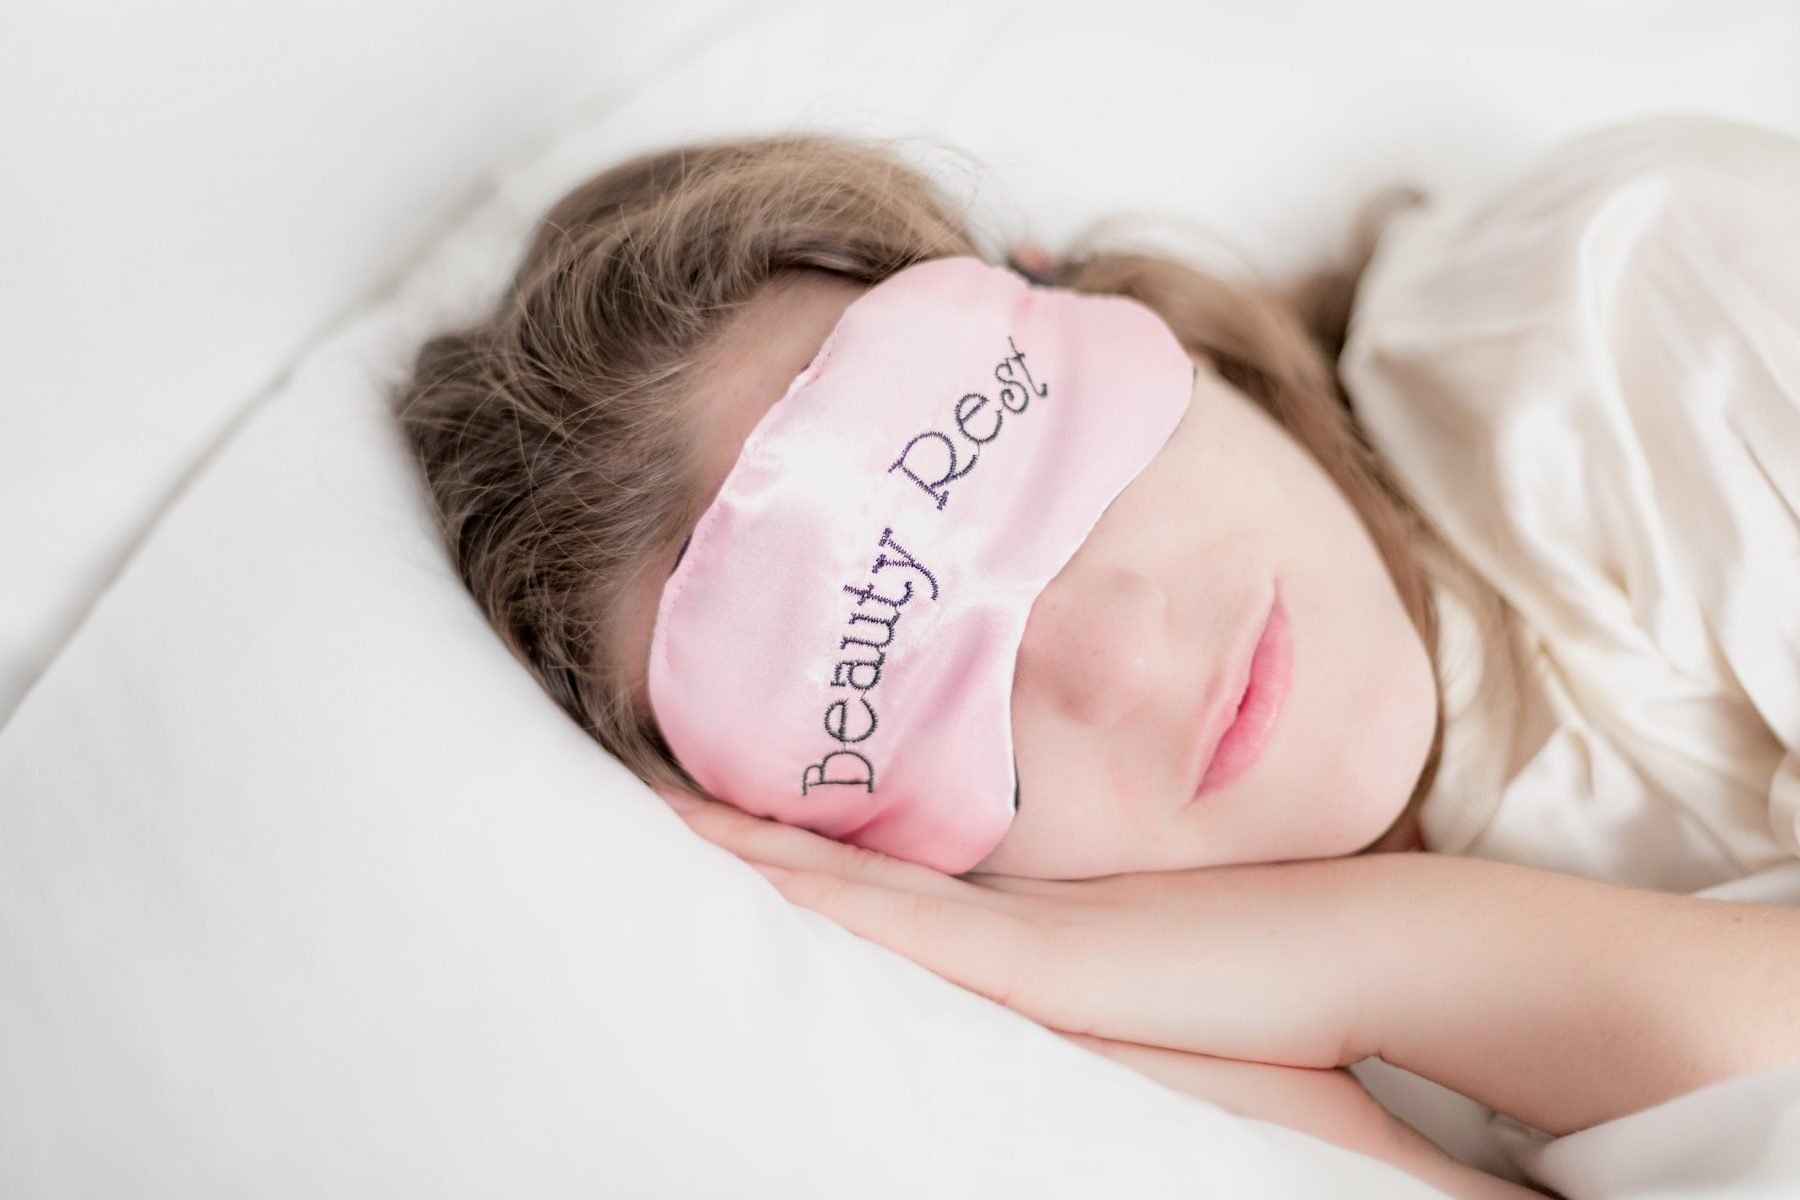 Woman with head on pillow wearing pink eye mask with Beauty Rest written on it